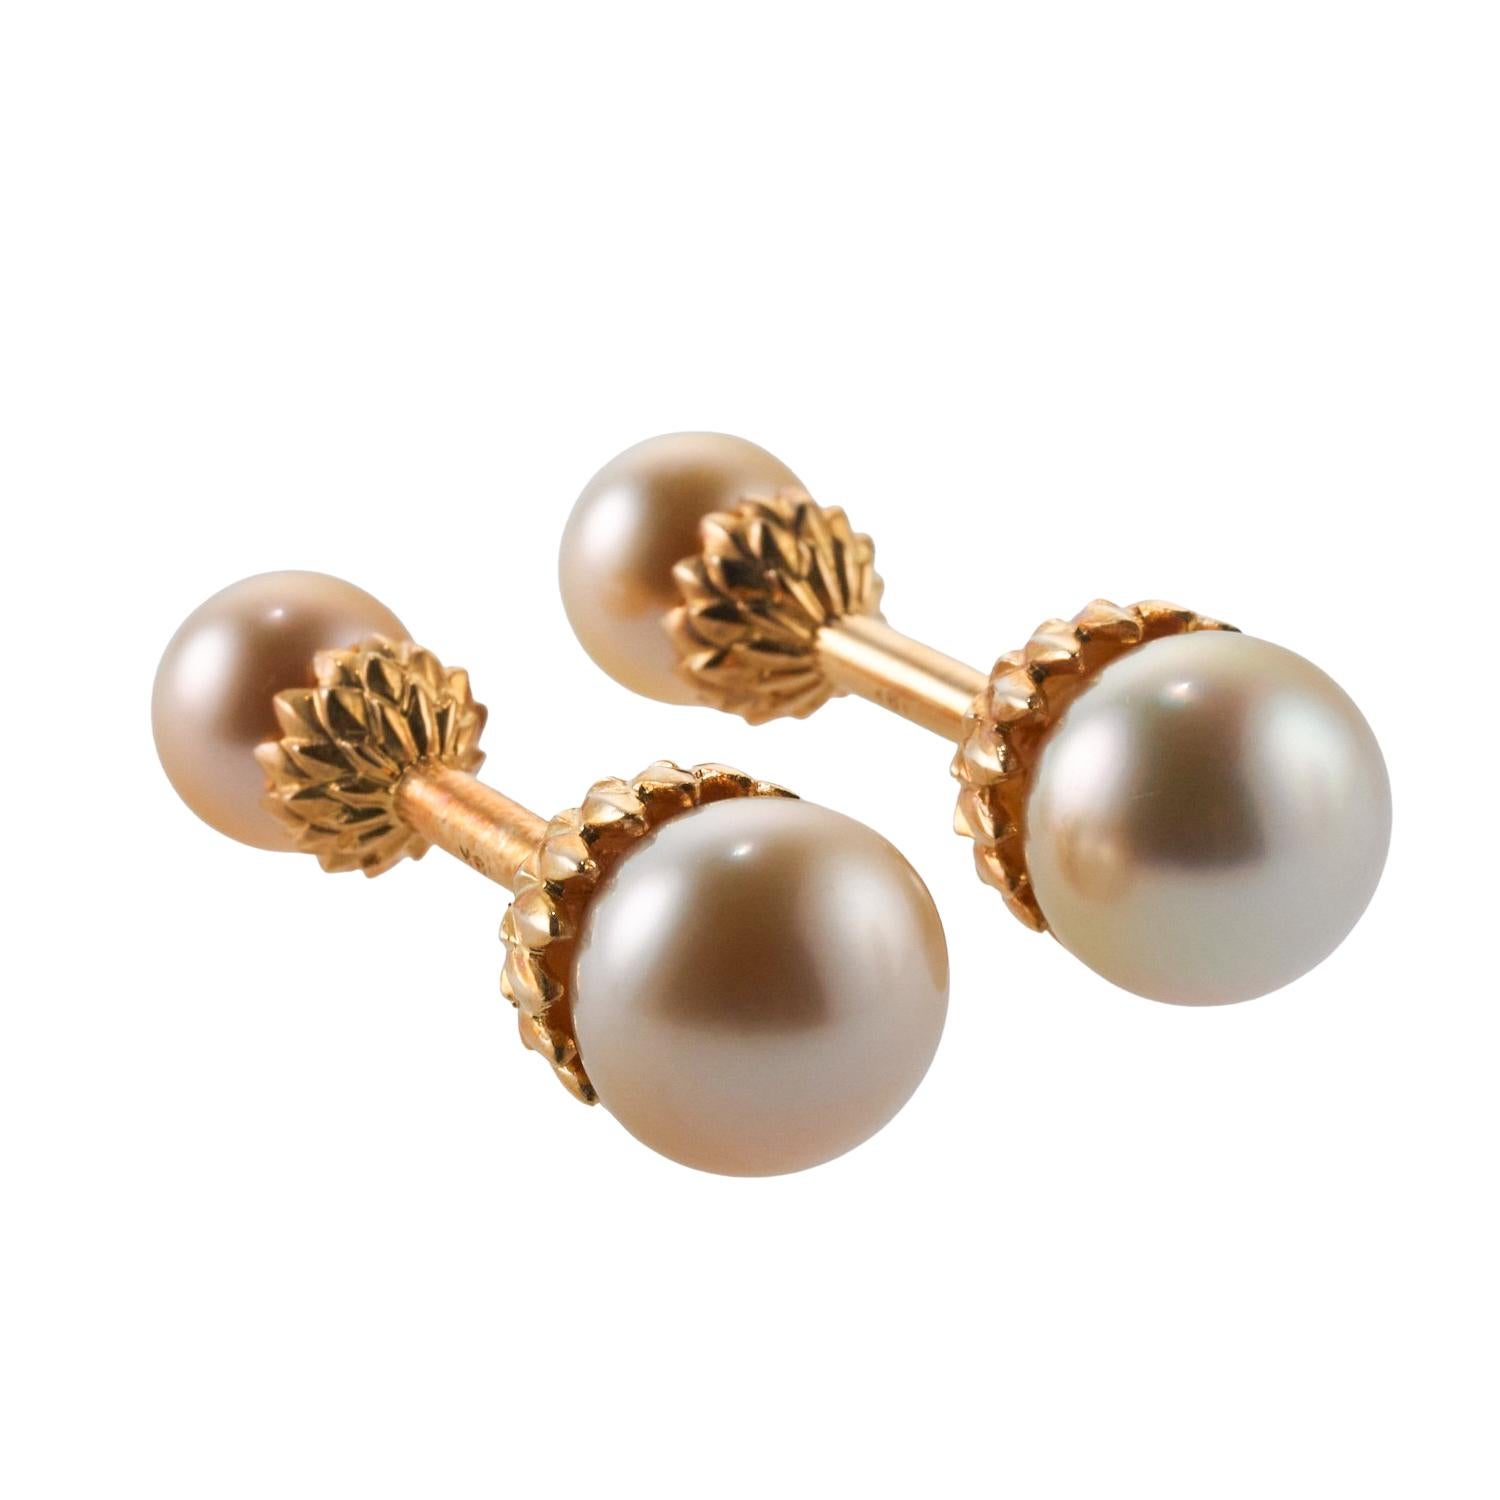 18K yellow gold golden South Sea Pearl cufflinks by Assael. Cufflink's top measure 10.1mm and back is 10.1mm. Marked: 18k, 585 ( stud hardware). Weight is 18.2 grams. Retail value $6250.